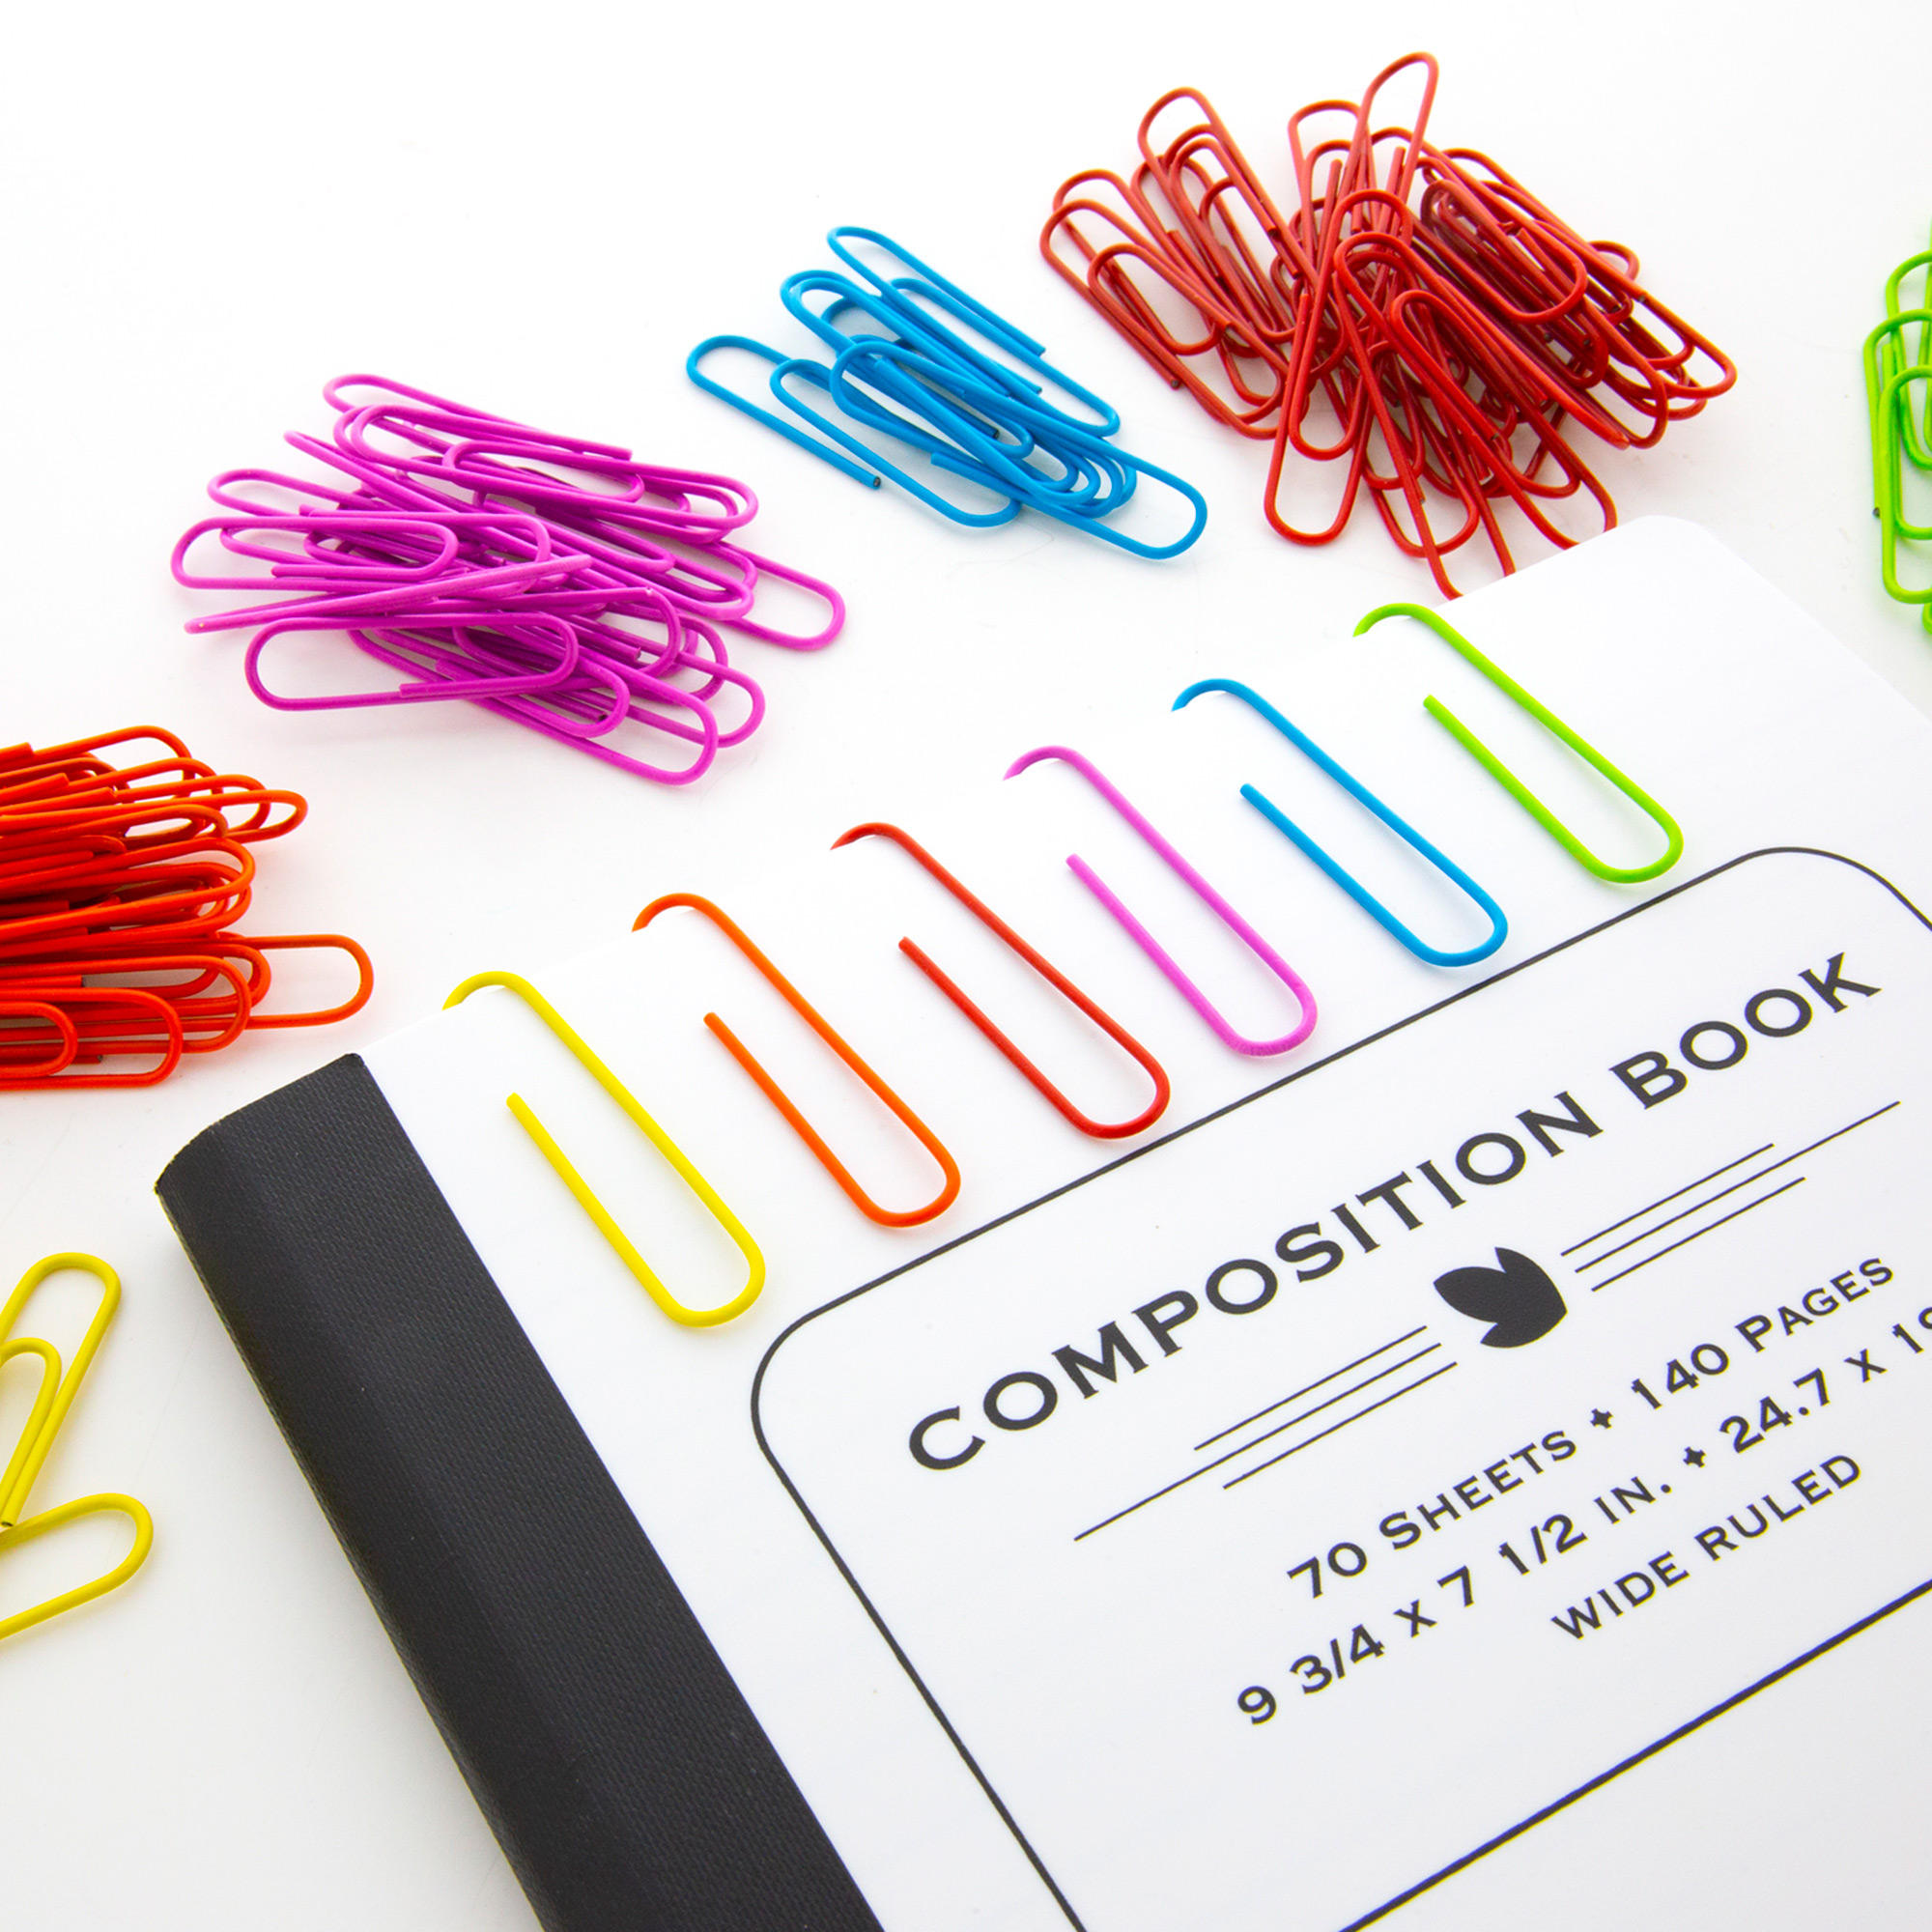 50MM School and Office Jumbo Paper Clips Great for Home PVC Free Pink Paper Clips Big Paper Clips with Vinyl Coated 100PCS 2 Large Paper Clips Vannise Paper Clips in Recyclable Container 